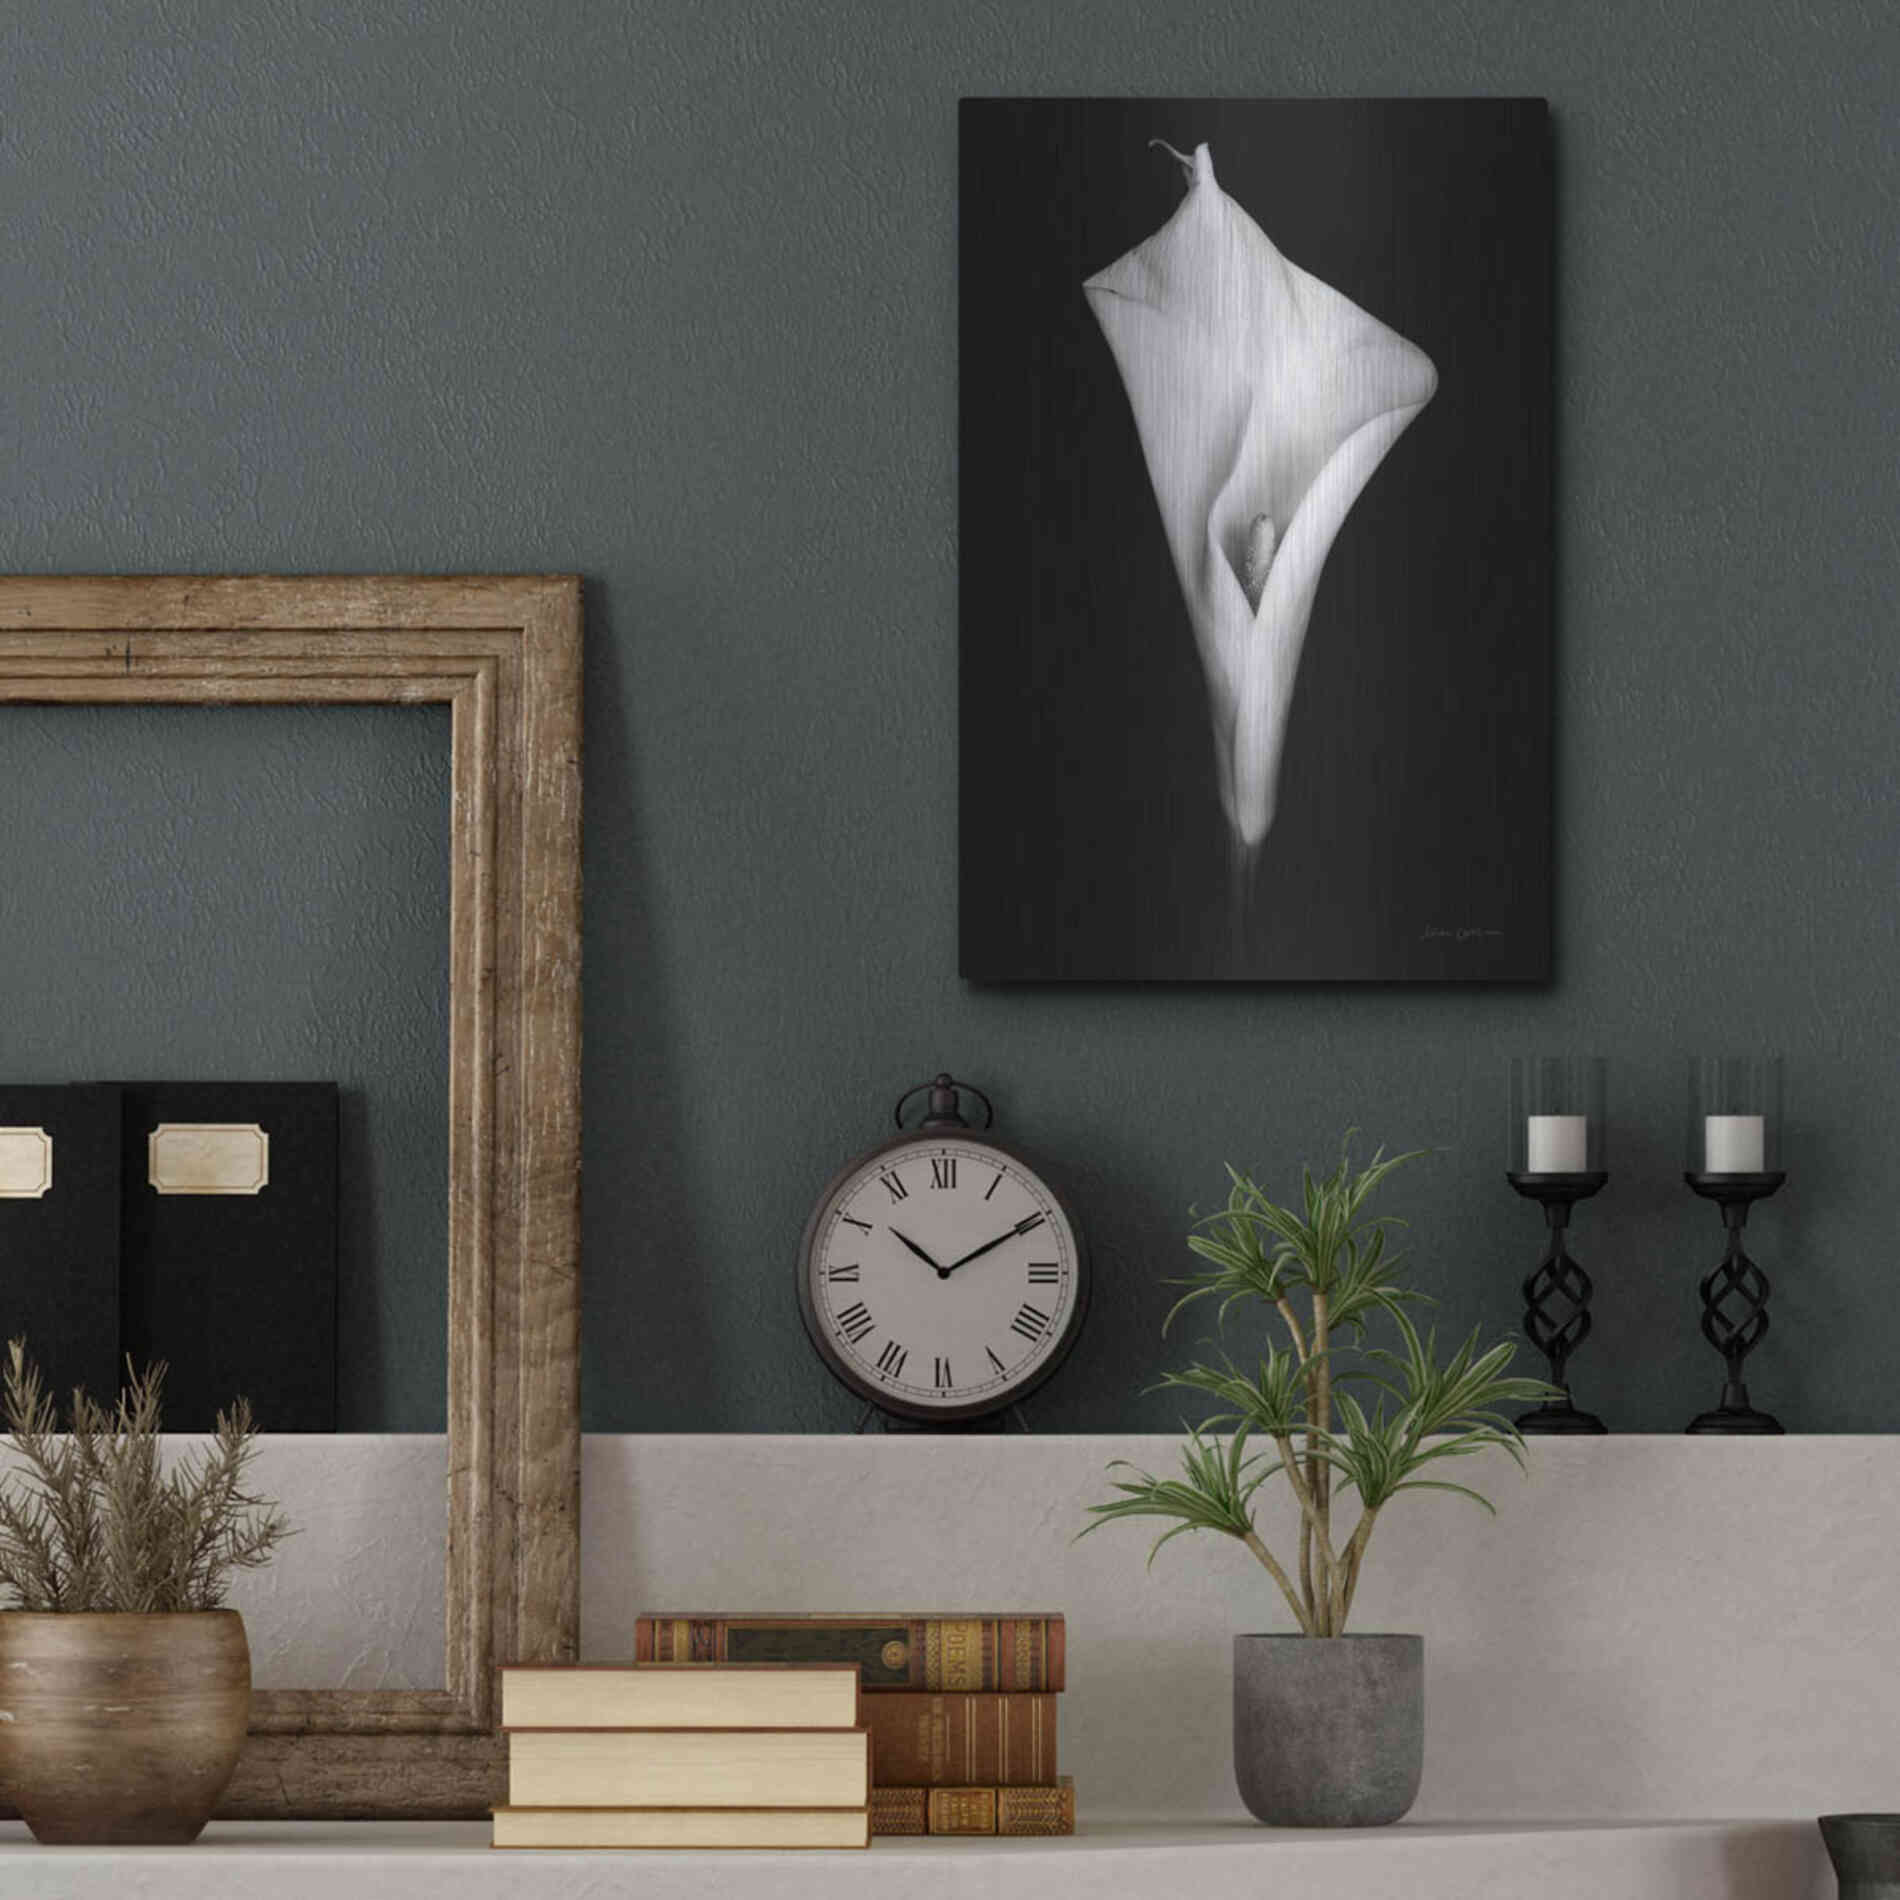 Luxe Metal Art 'Elegant Calla I' by Elise Catterall, Metal Wall Art,12x16